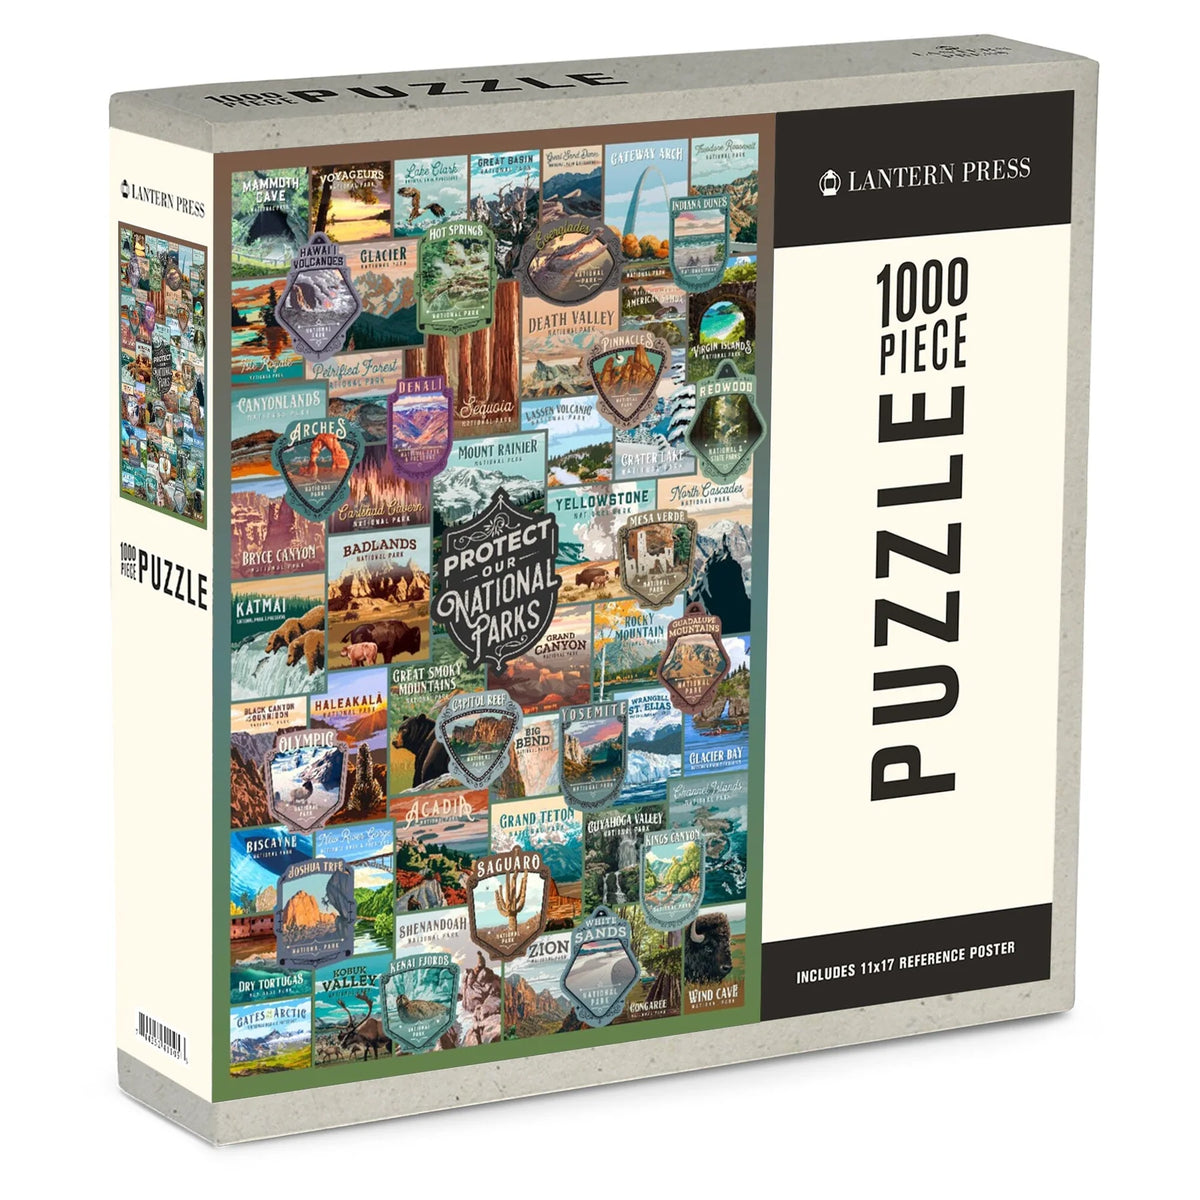 Protect Our National Parks 1000 Pc Puzzle